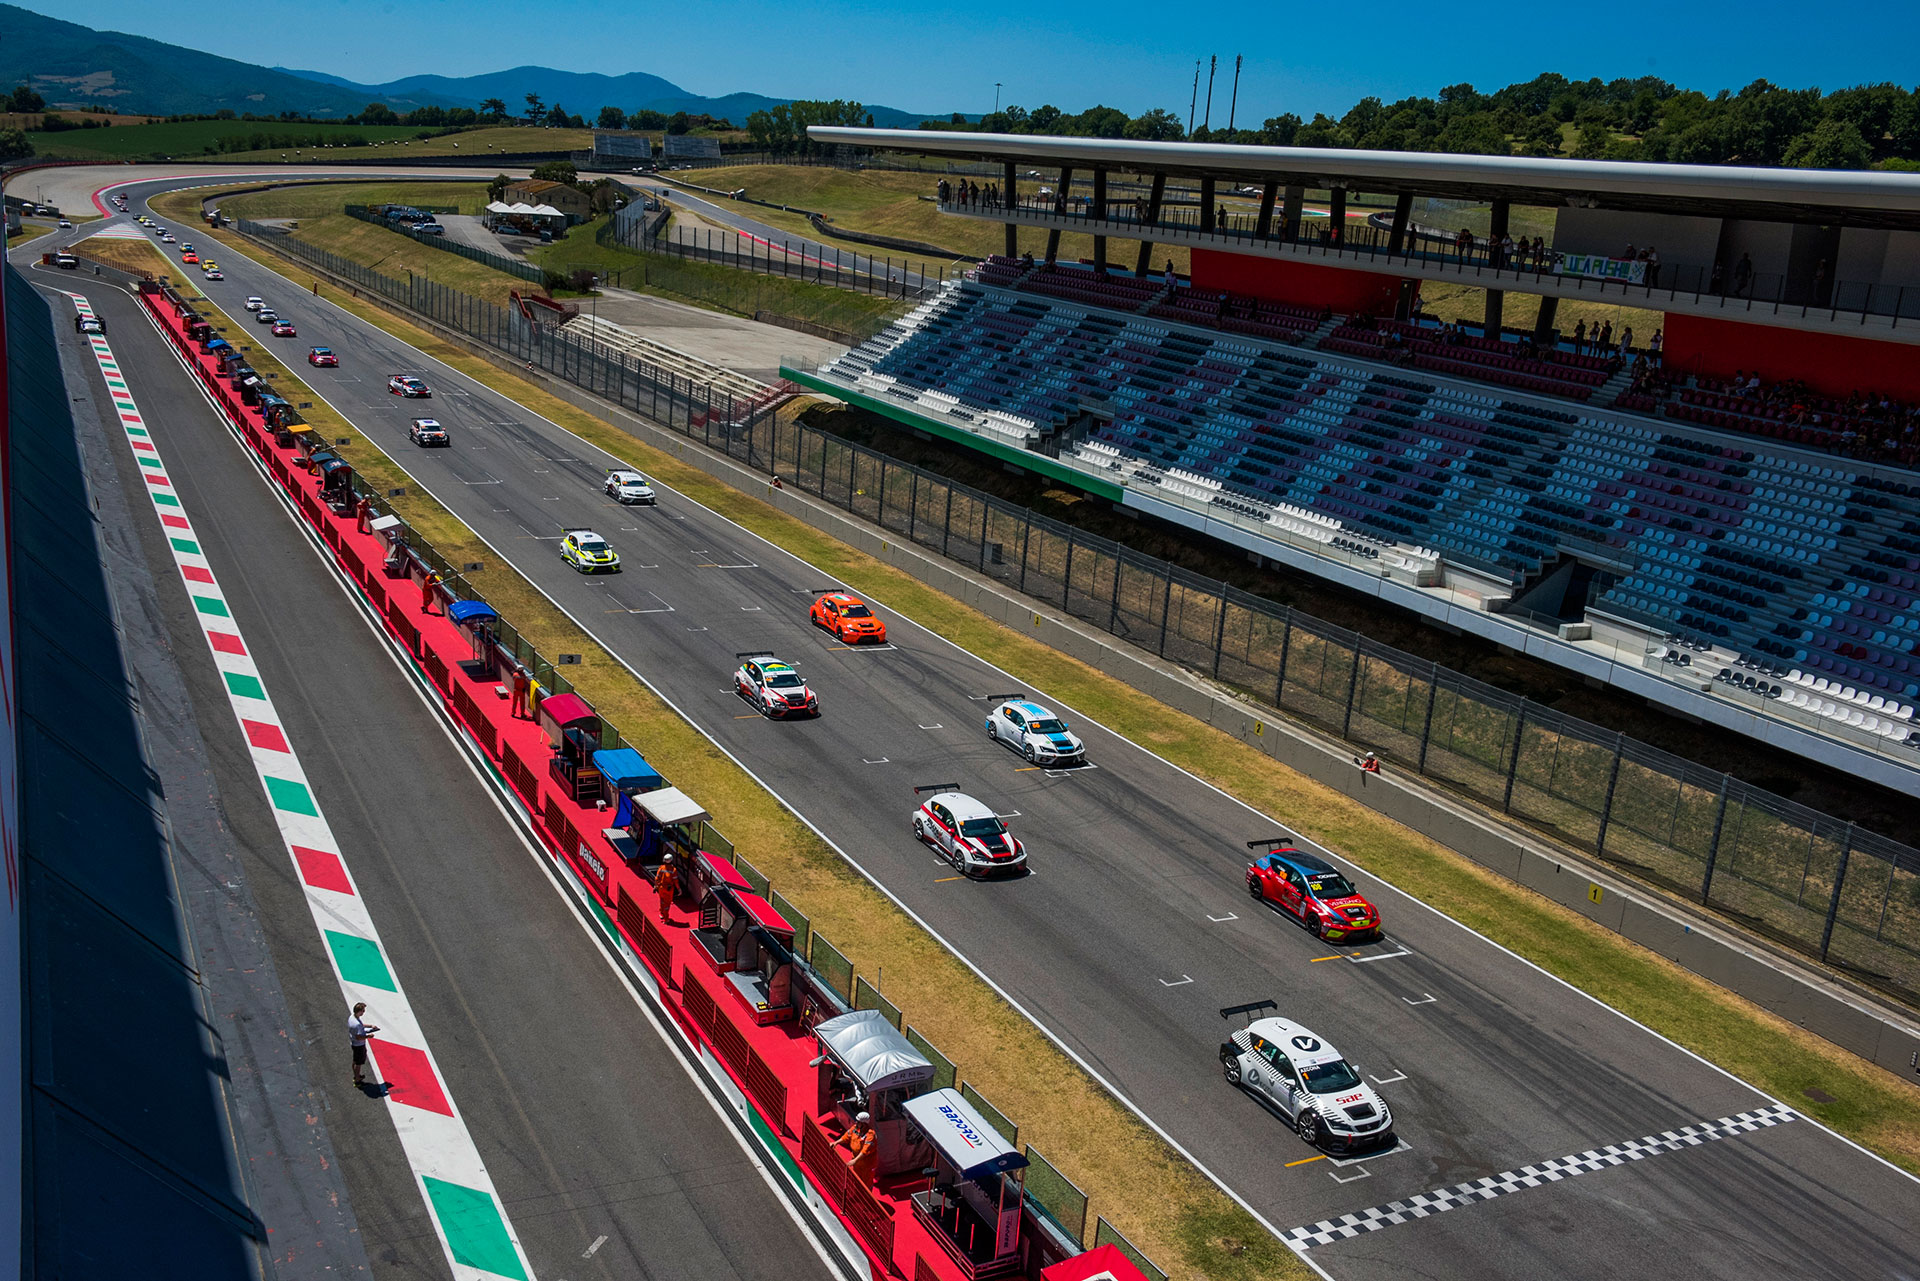 Mikel Azcona rediscovers again with the victory in Mugello